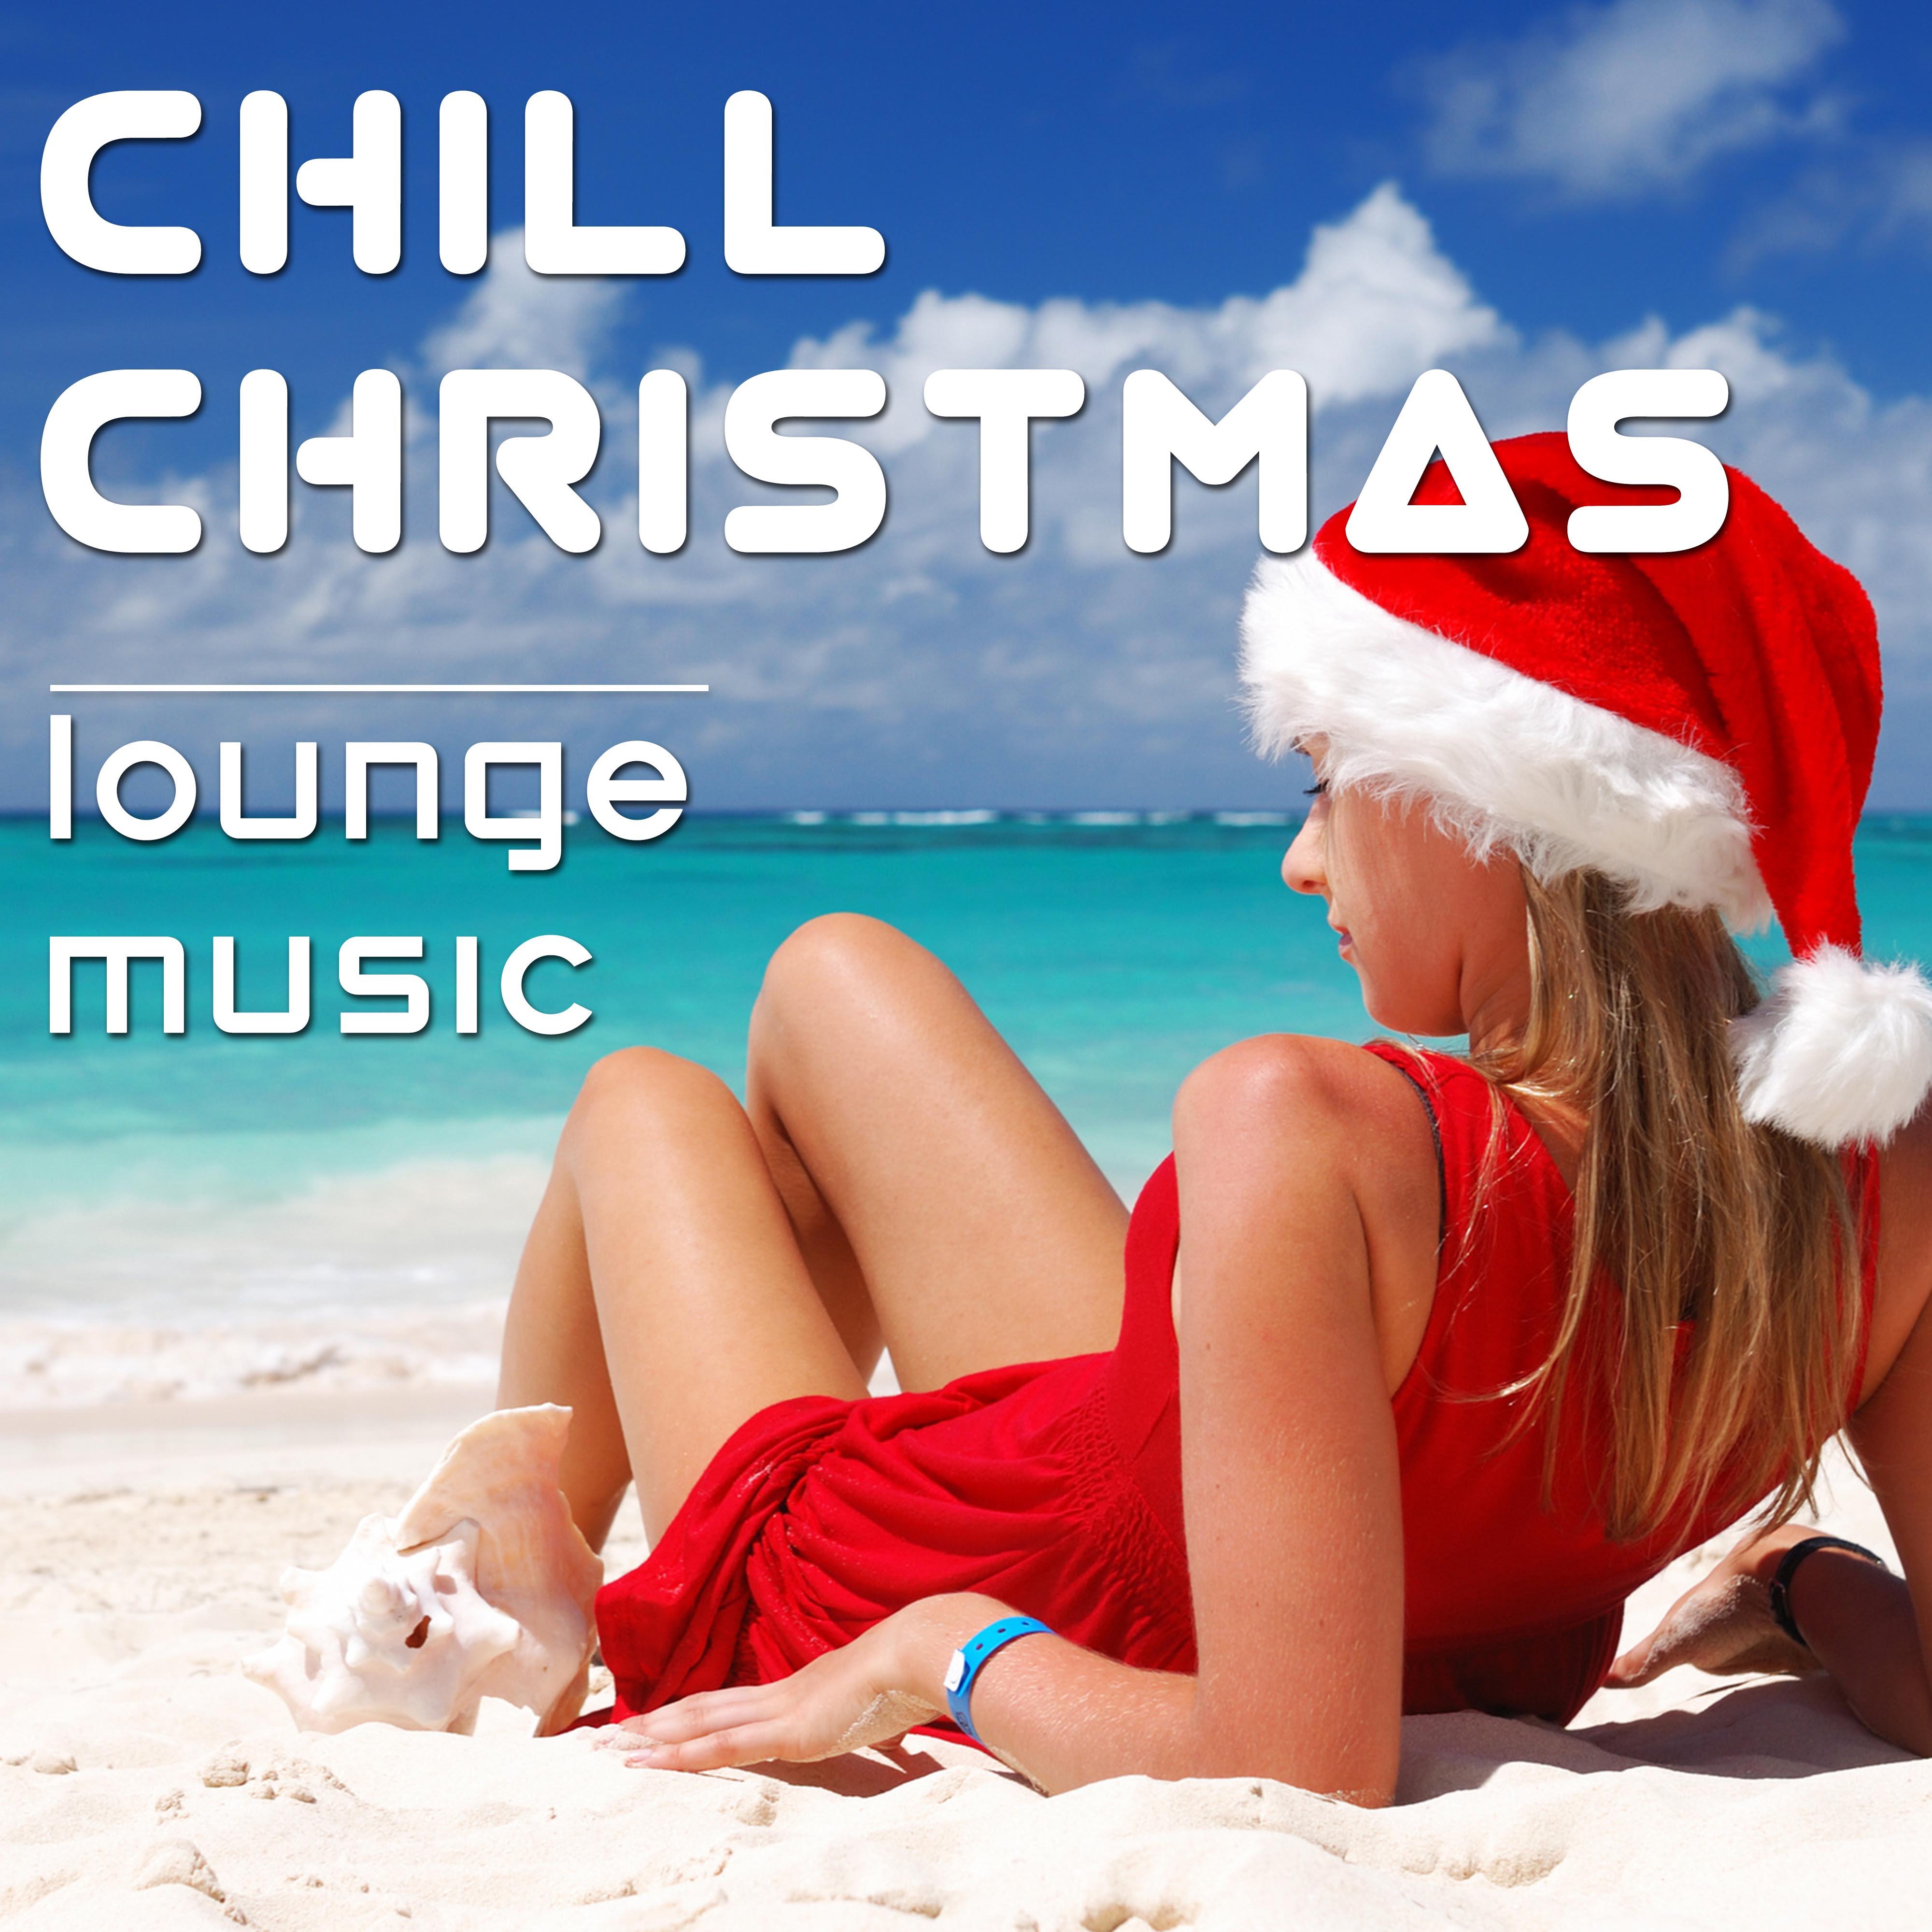 Chill Christmas: Lounge Music for Parties, Restaurants, Pubs for Christmas Holidays and New Year's Eve Celebrations